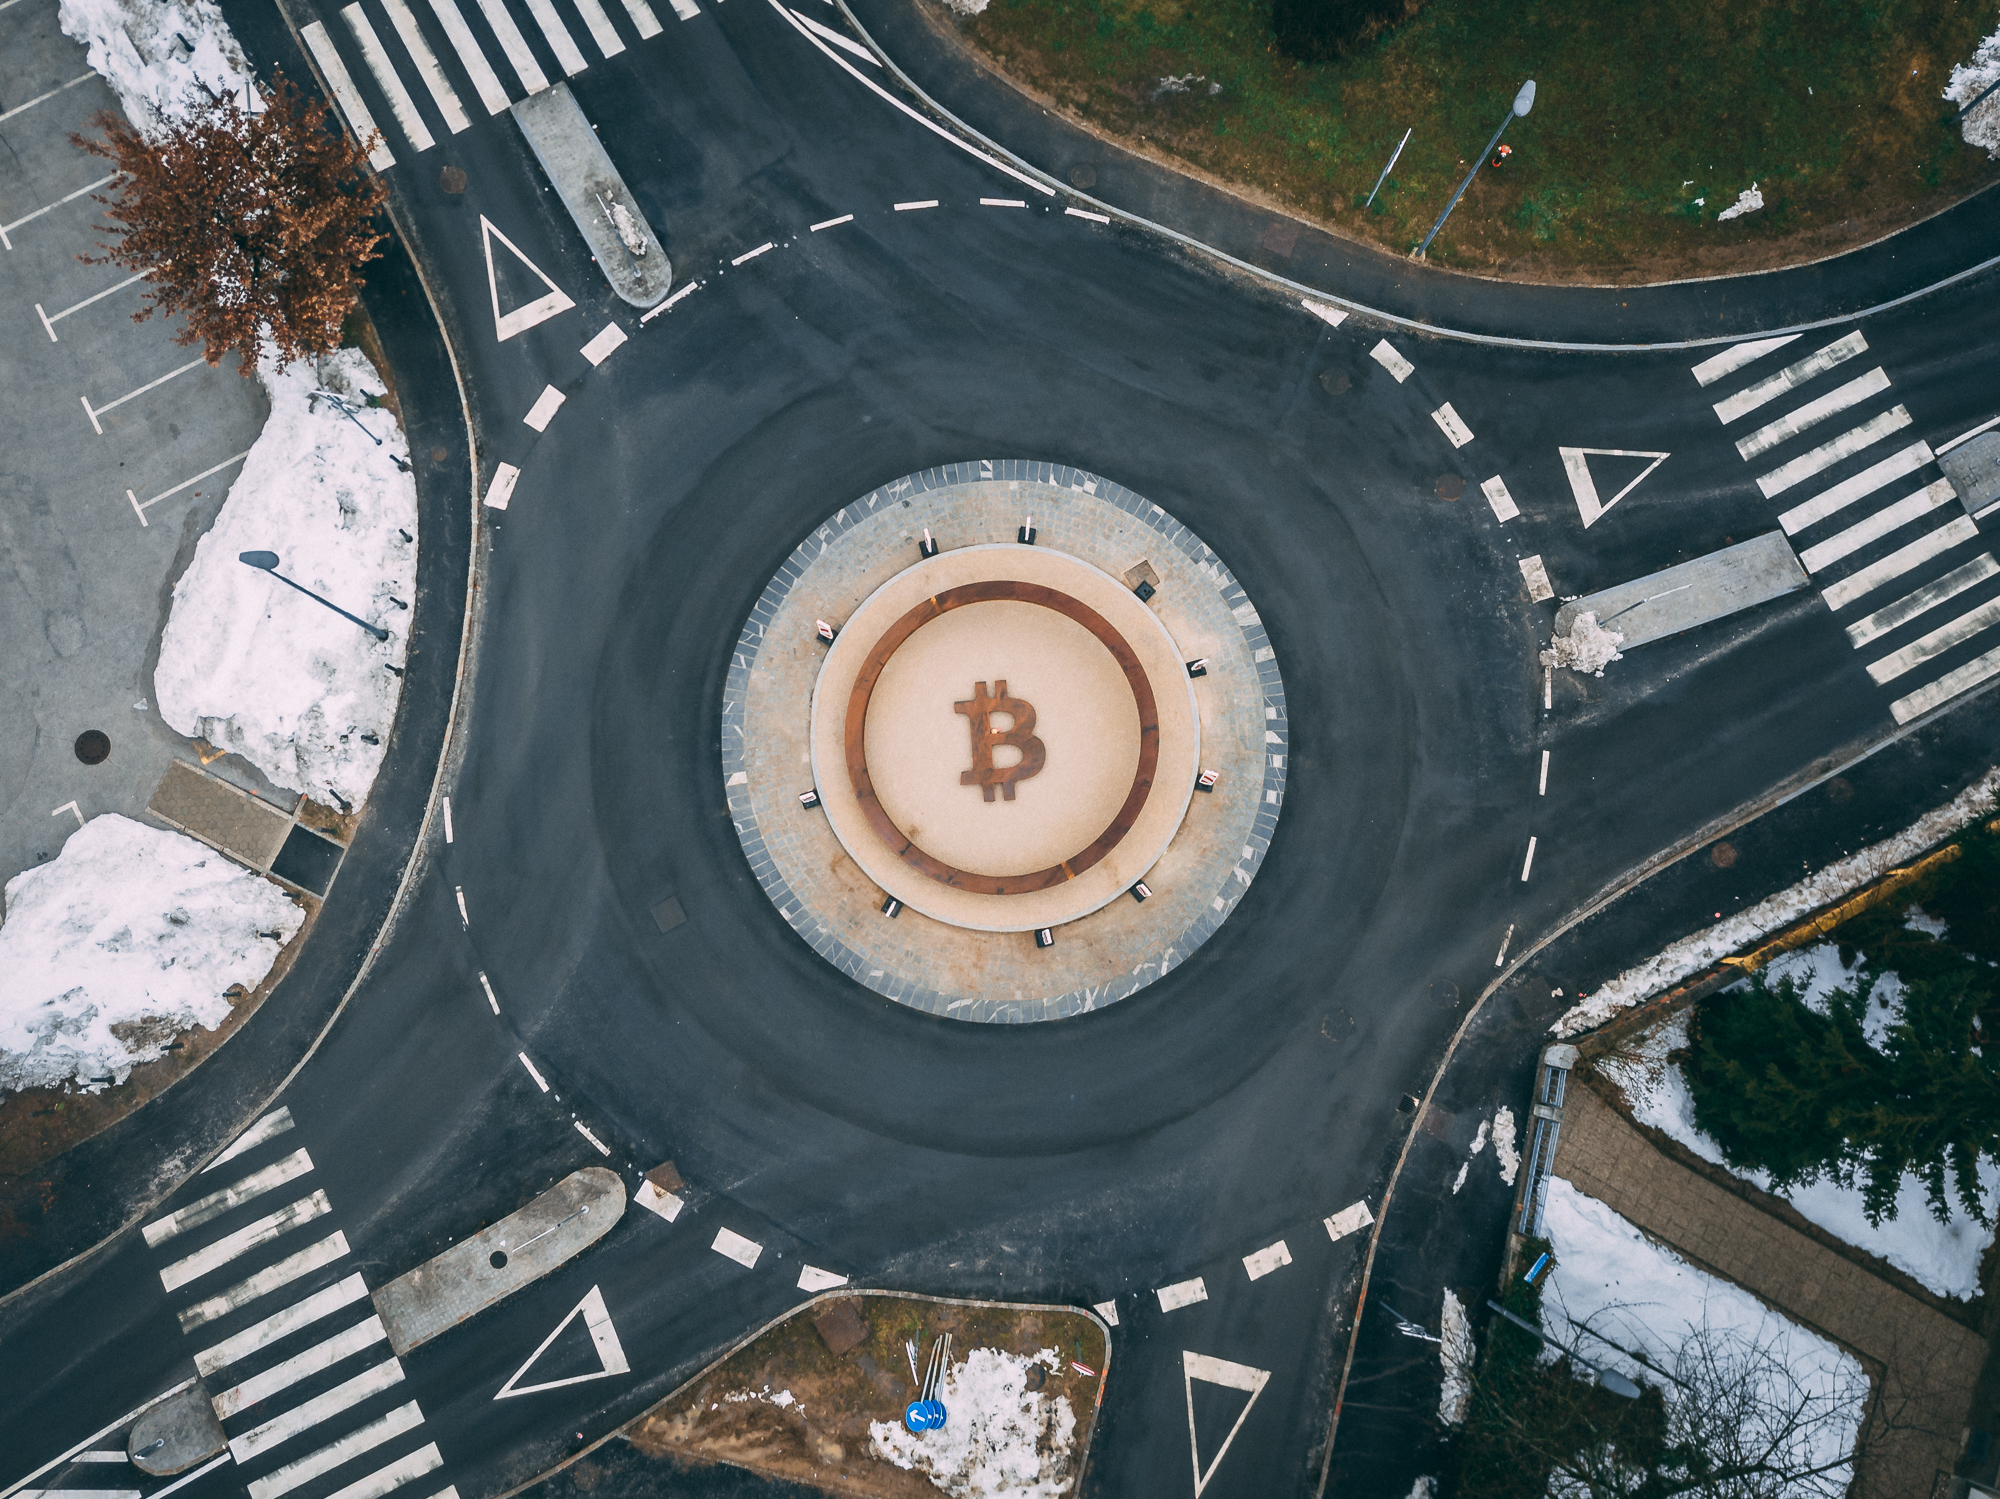 Bitcoin sign / statue at the roundabout in Kranj (Slovenia, Europe).